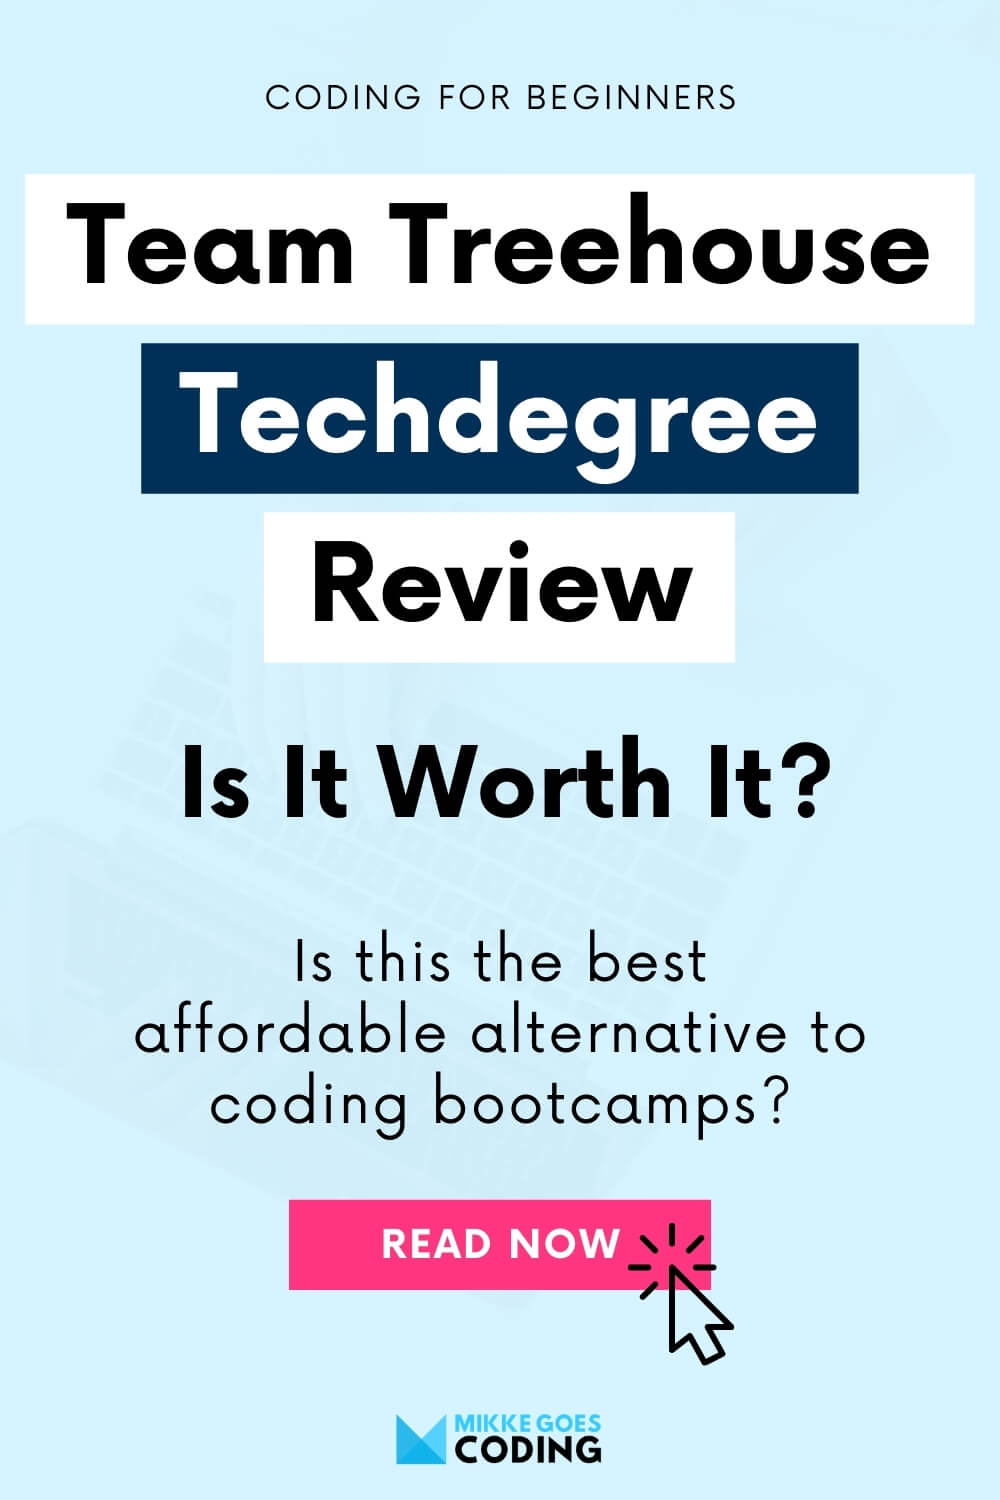 Team Treehouse Techdegree Review - Is It Worth It